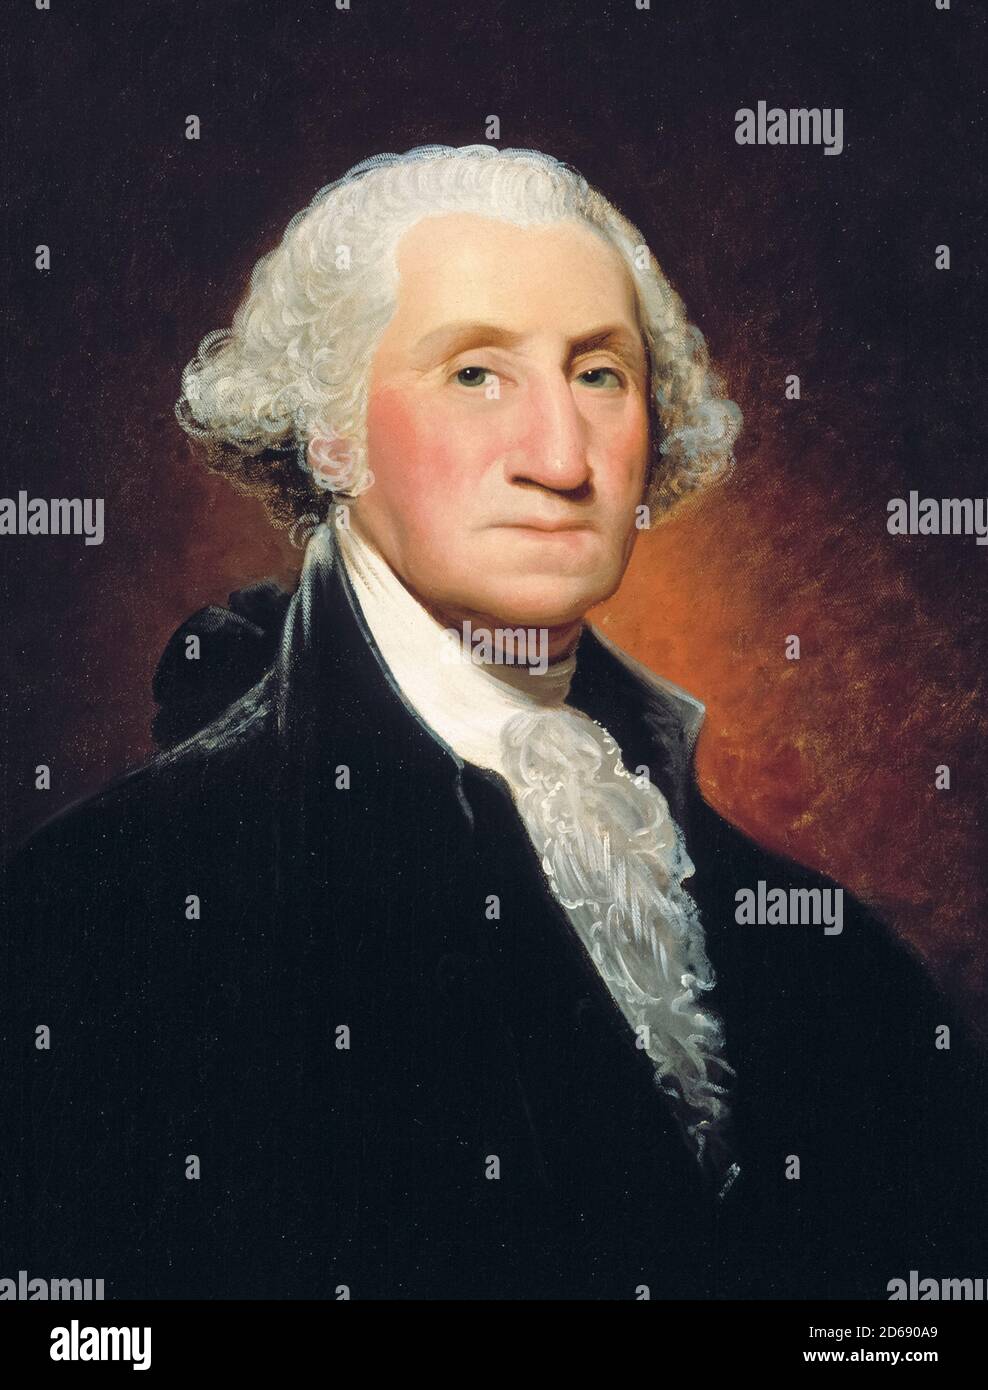 George Washington (1732-1799), 1st President of the United States, portrait painting by William Winstanley, circa 1803 Stock Photo